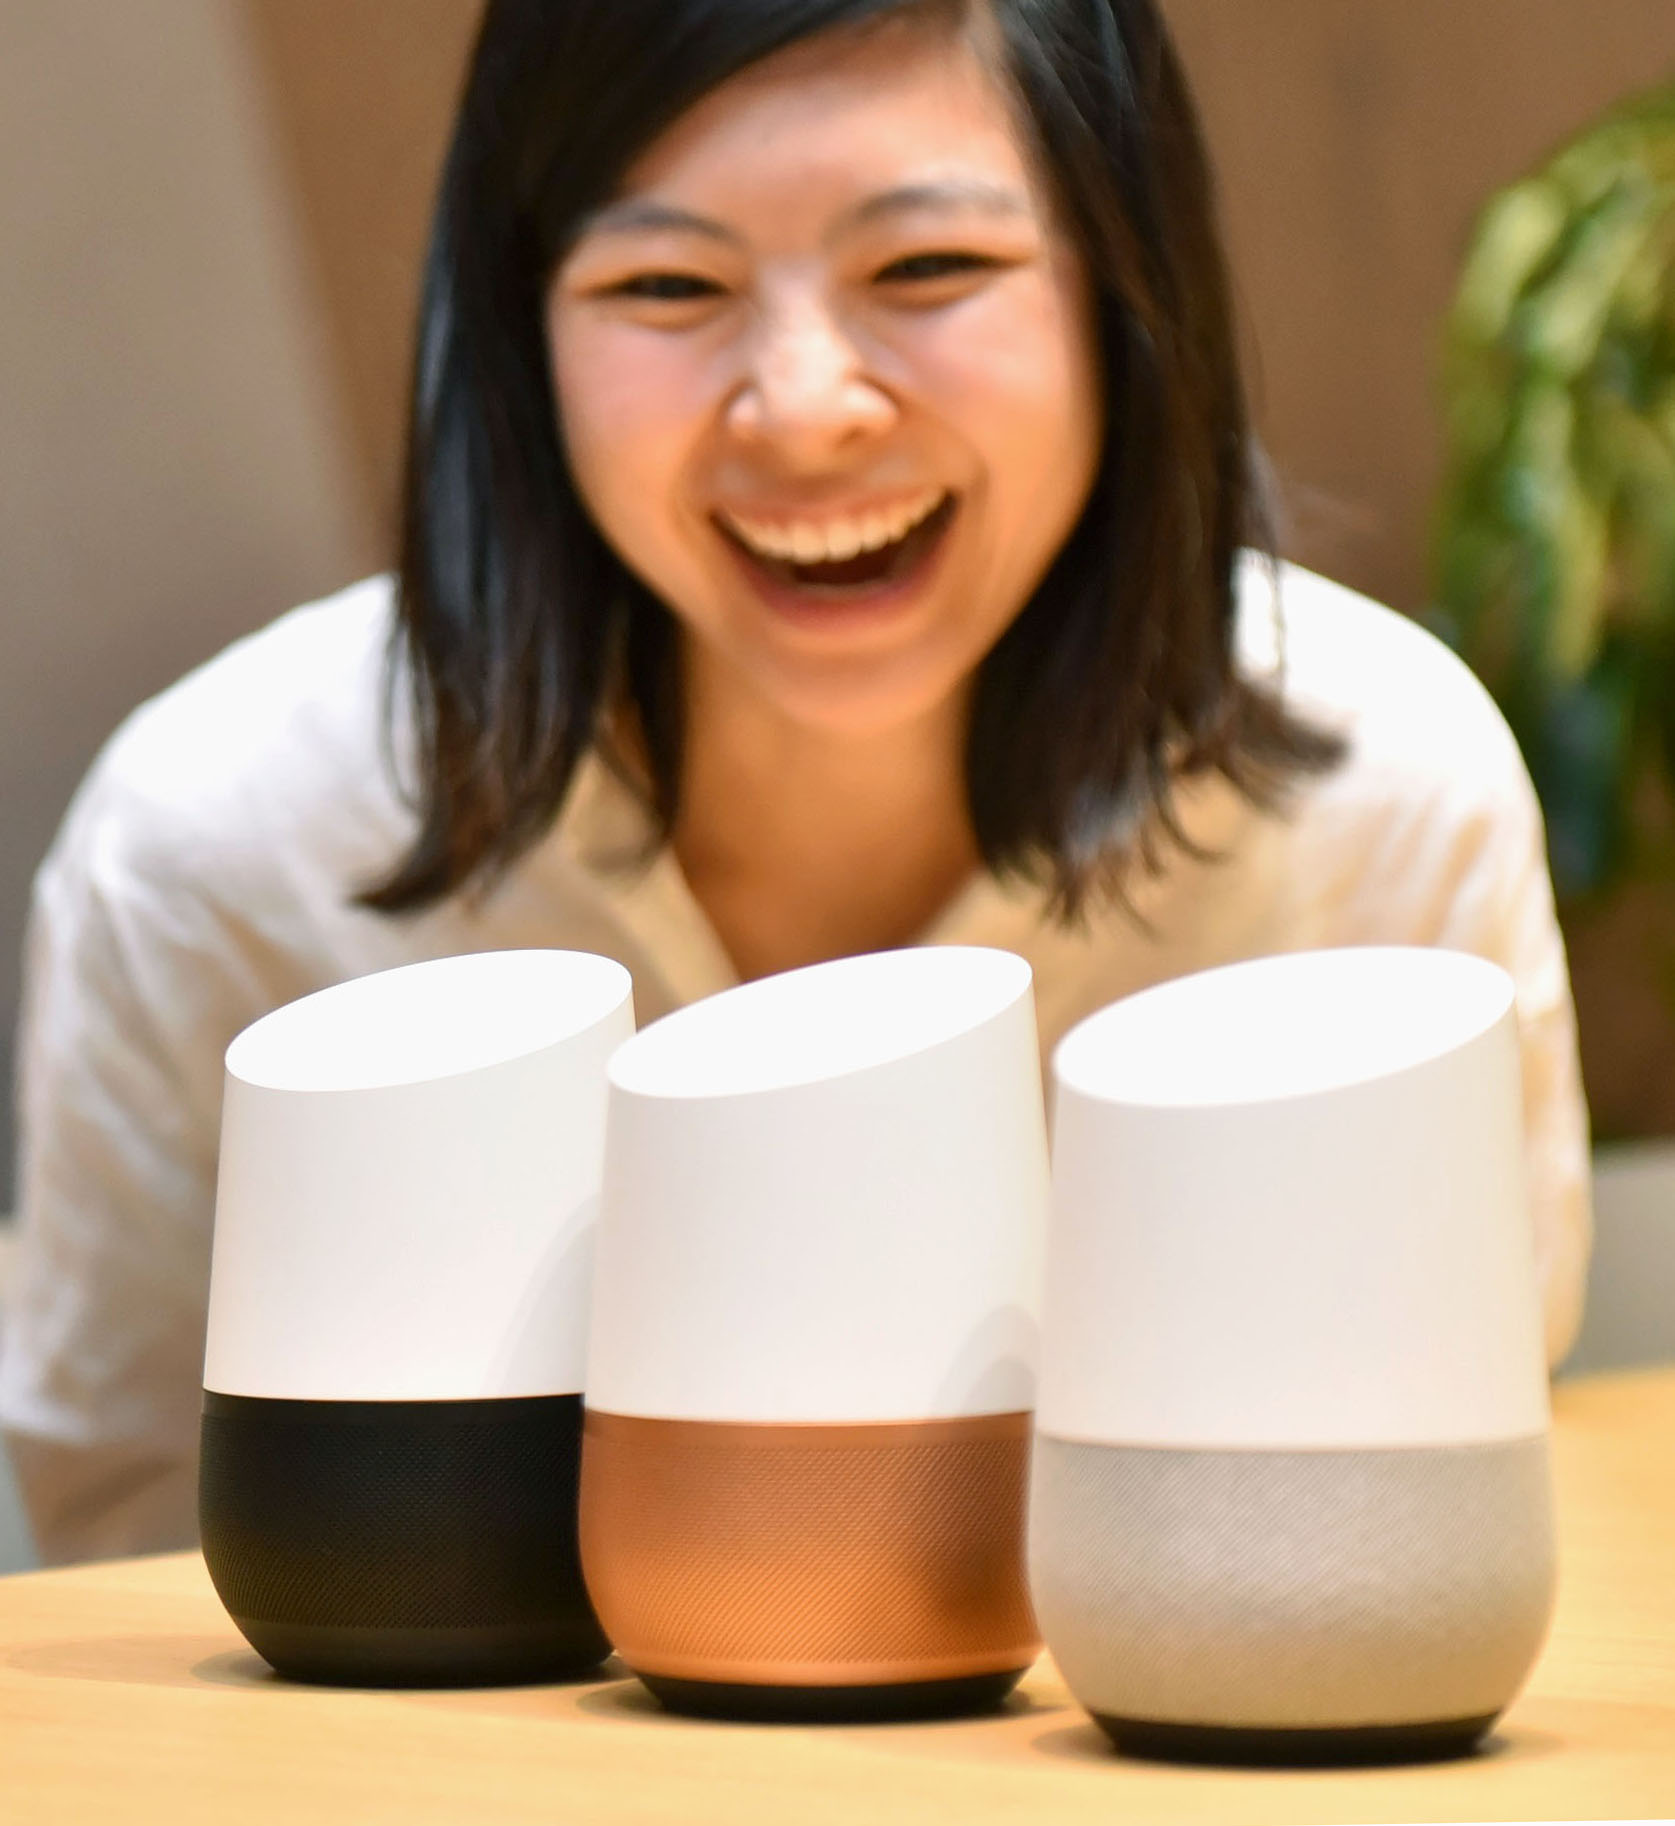 PHOTO: The Google Home smart speaker, as shown during a press event in Tokyo on Oct. 5, 2017, will be sold in Japan from Oct. 6. Its compact version, the Google Home Mini, will also become available. 